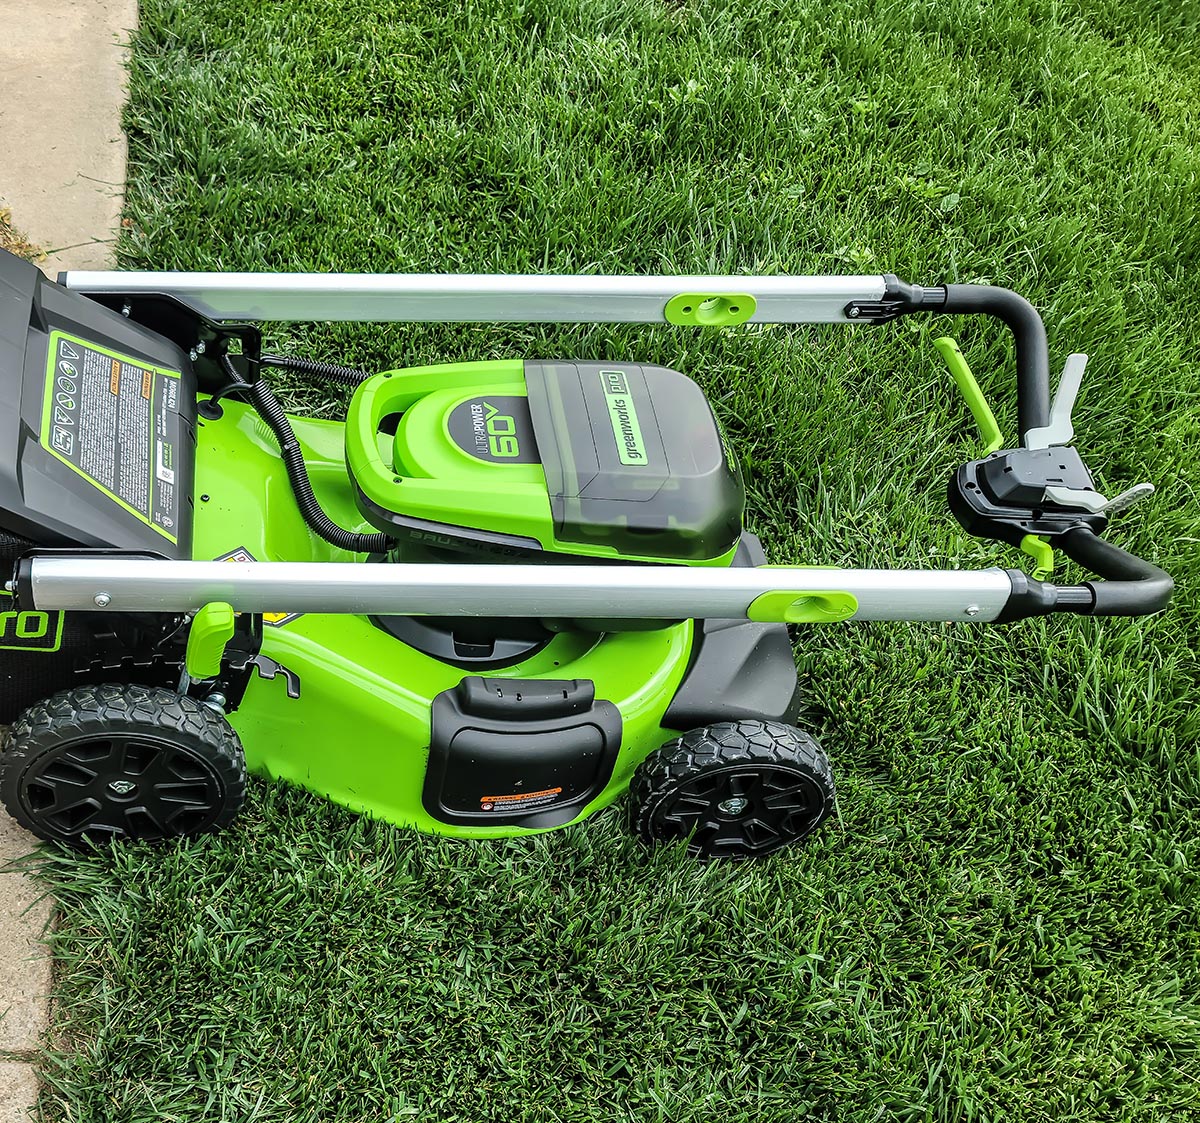 The handle on the Greenworks Pro 60V 21-Inch Battery Lawn Mower folded over for storage